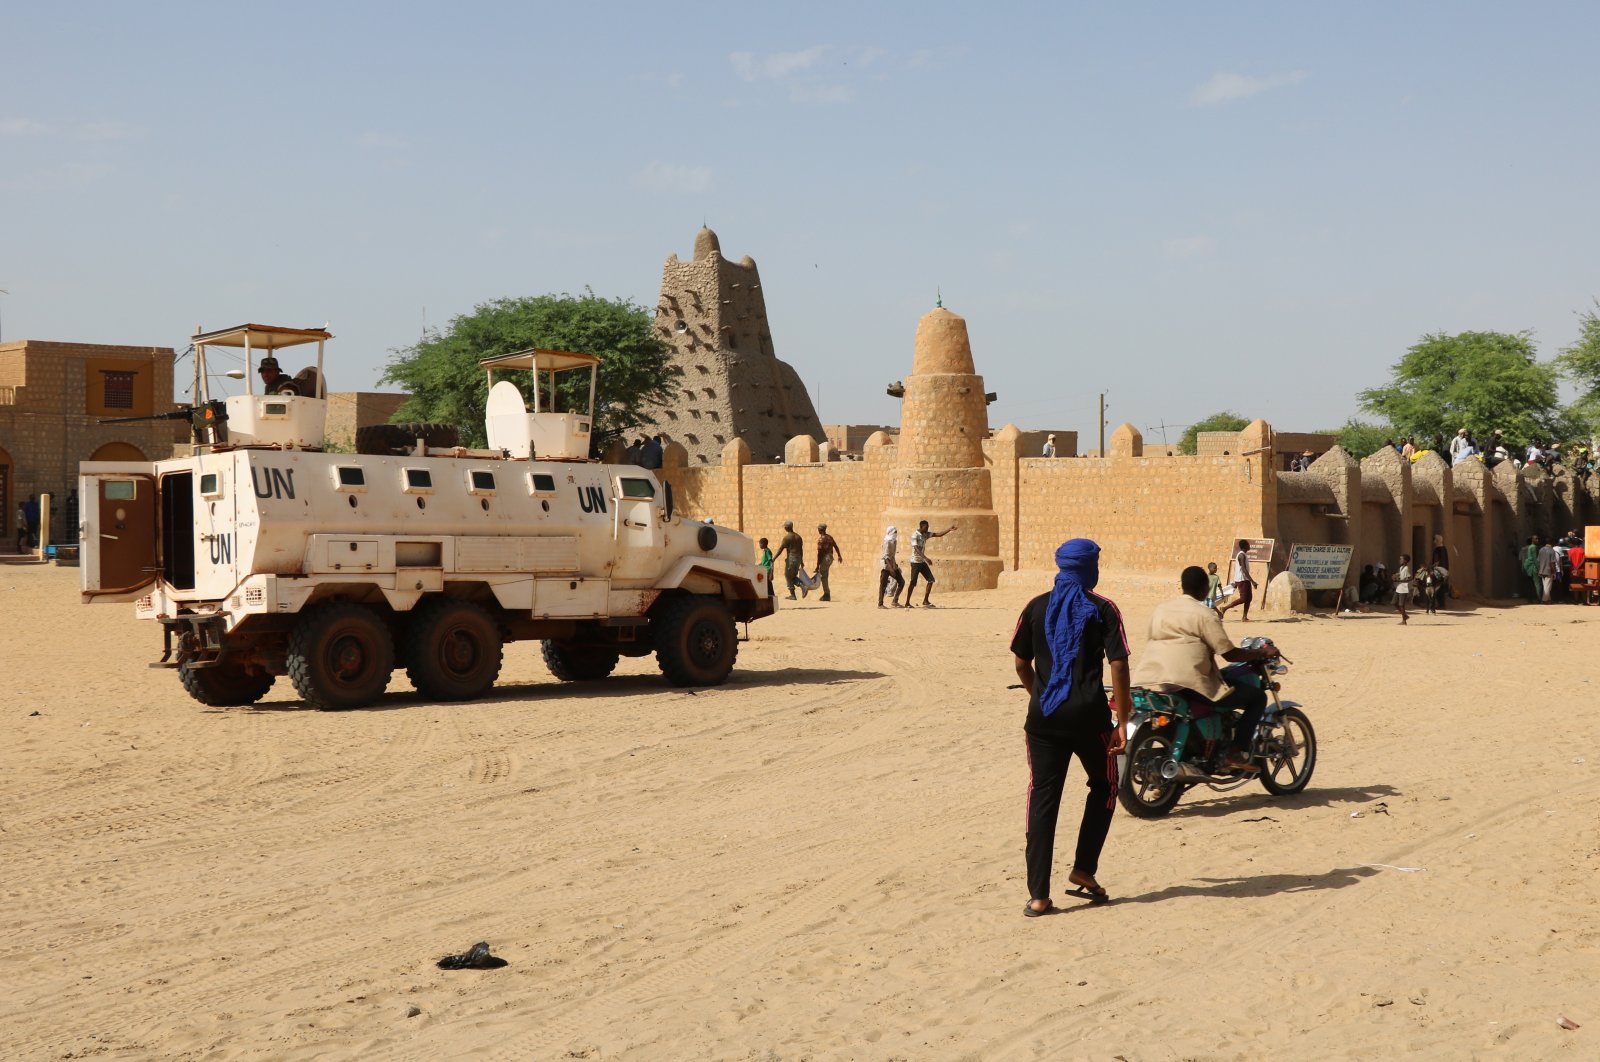 United Nation forces patrol the streets, Timbuktu, Mali, Sept. 26, 2021. (AP Photo)